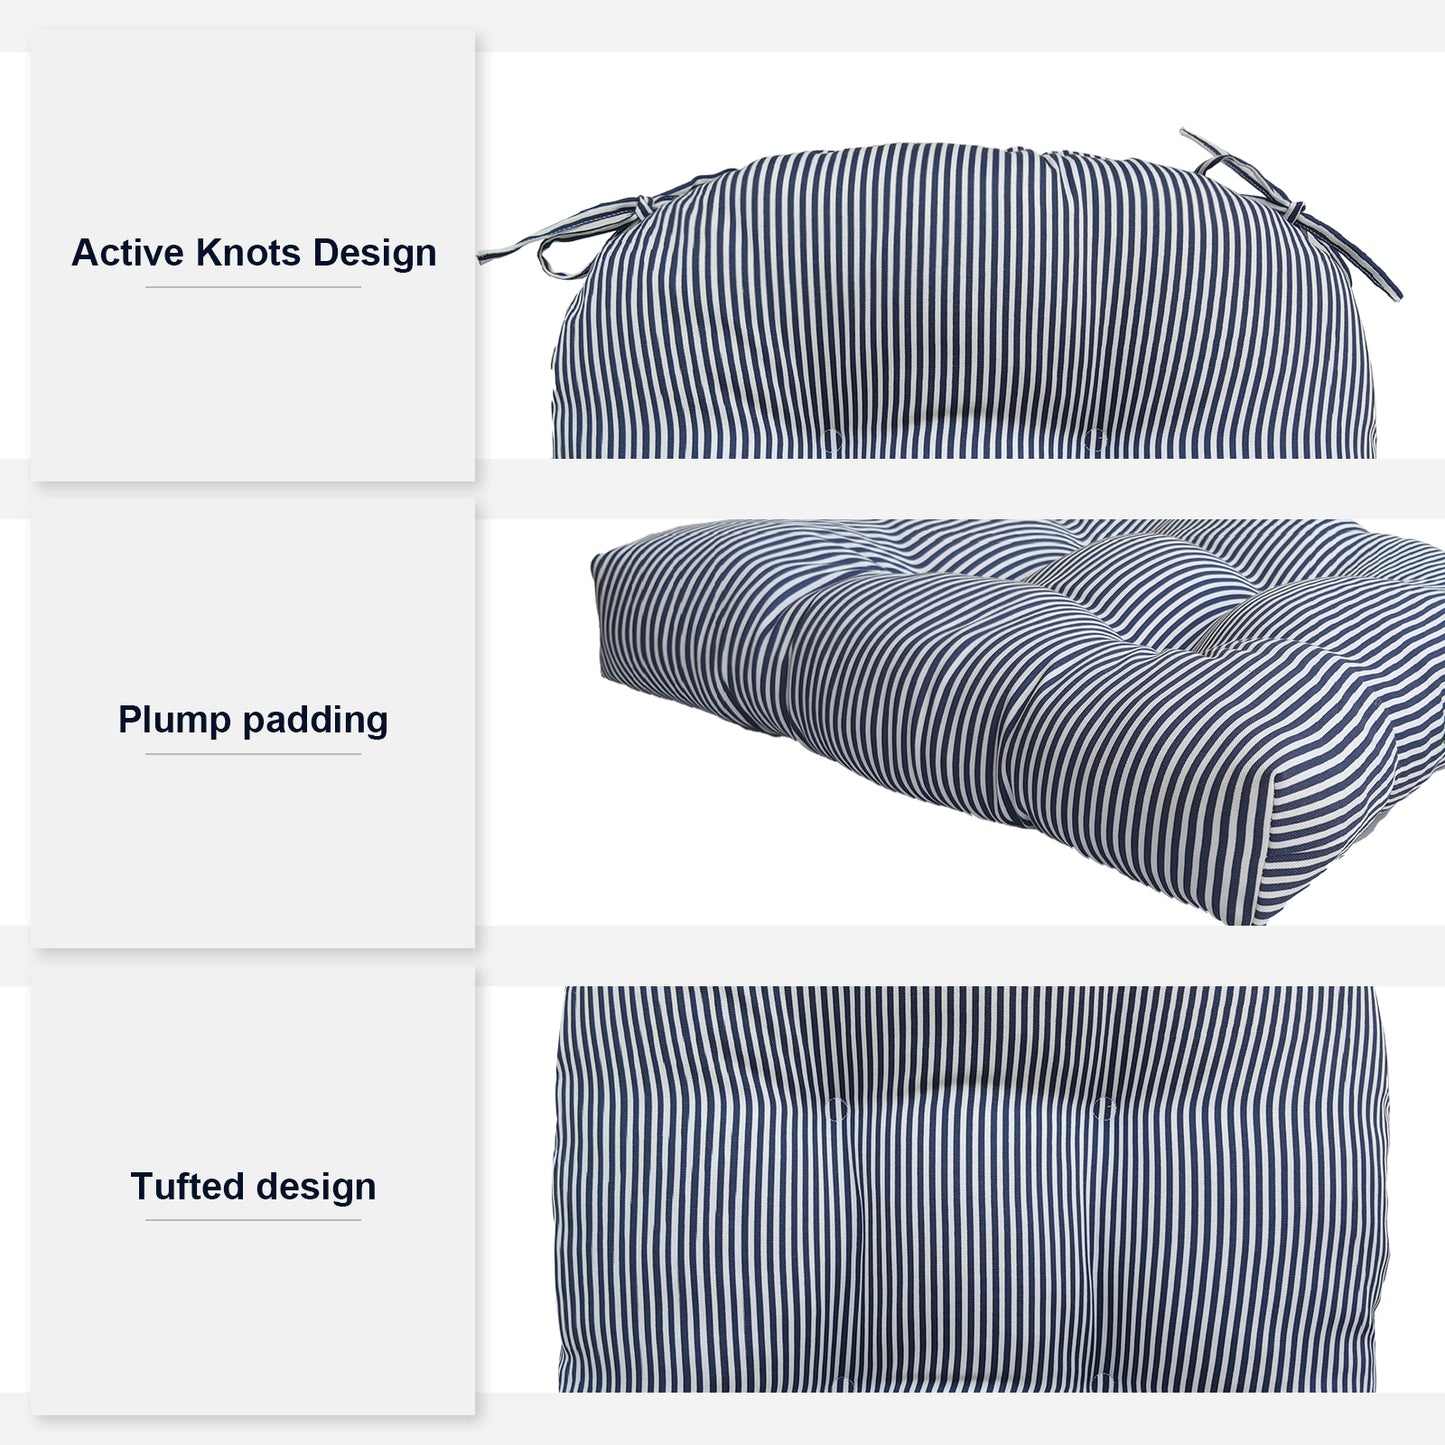 Melody Elephant Patio Wicker Chair Cushions, All Weather Outdoor Tufted Chair Pads Pack of 2, 19 x 19 x 5 Inch U-Shaped Seat Cushions of Garden Furniture Decoration, Stripe Navy